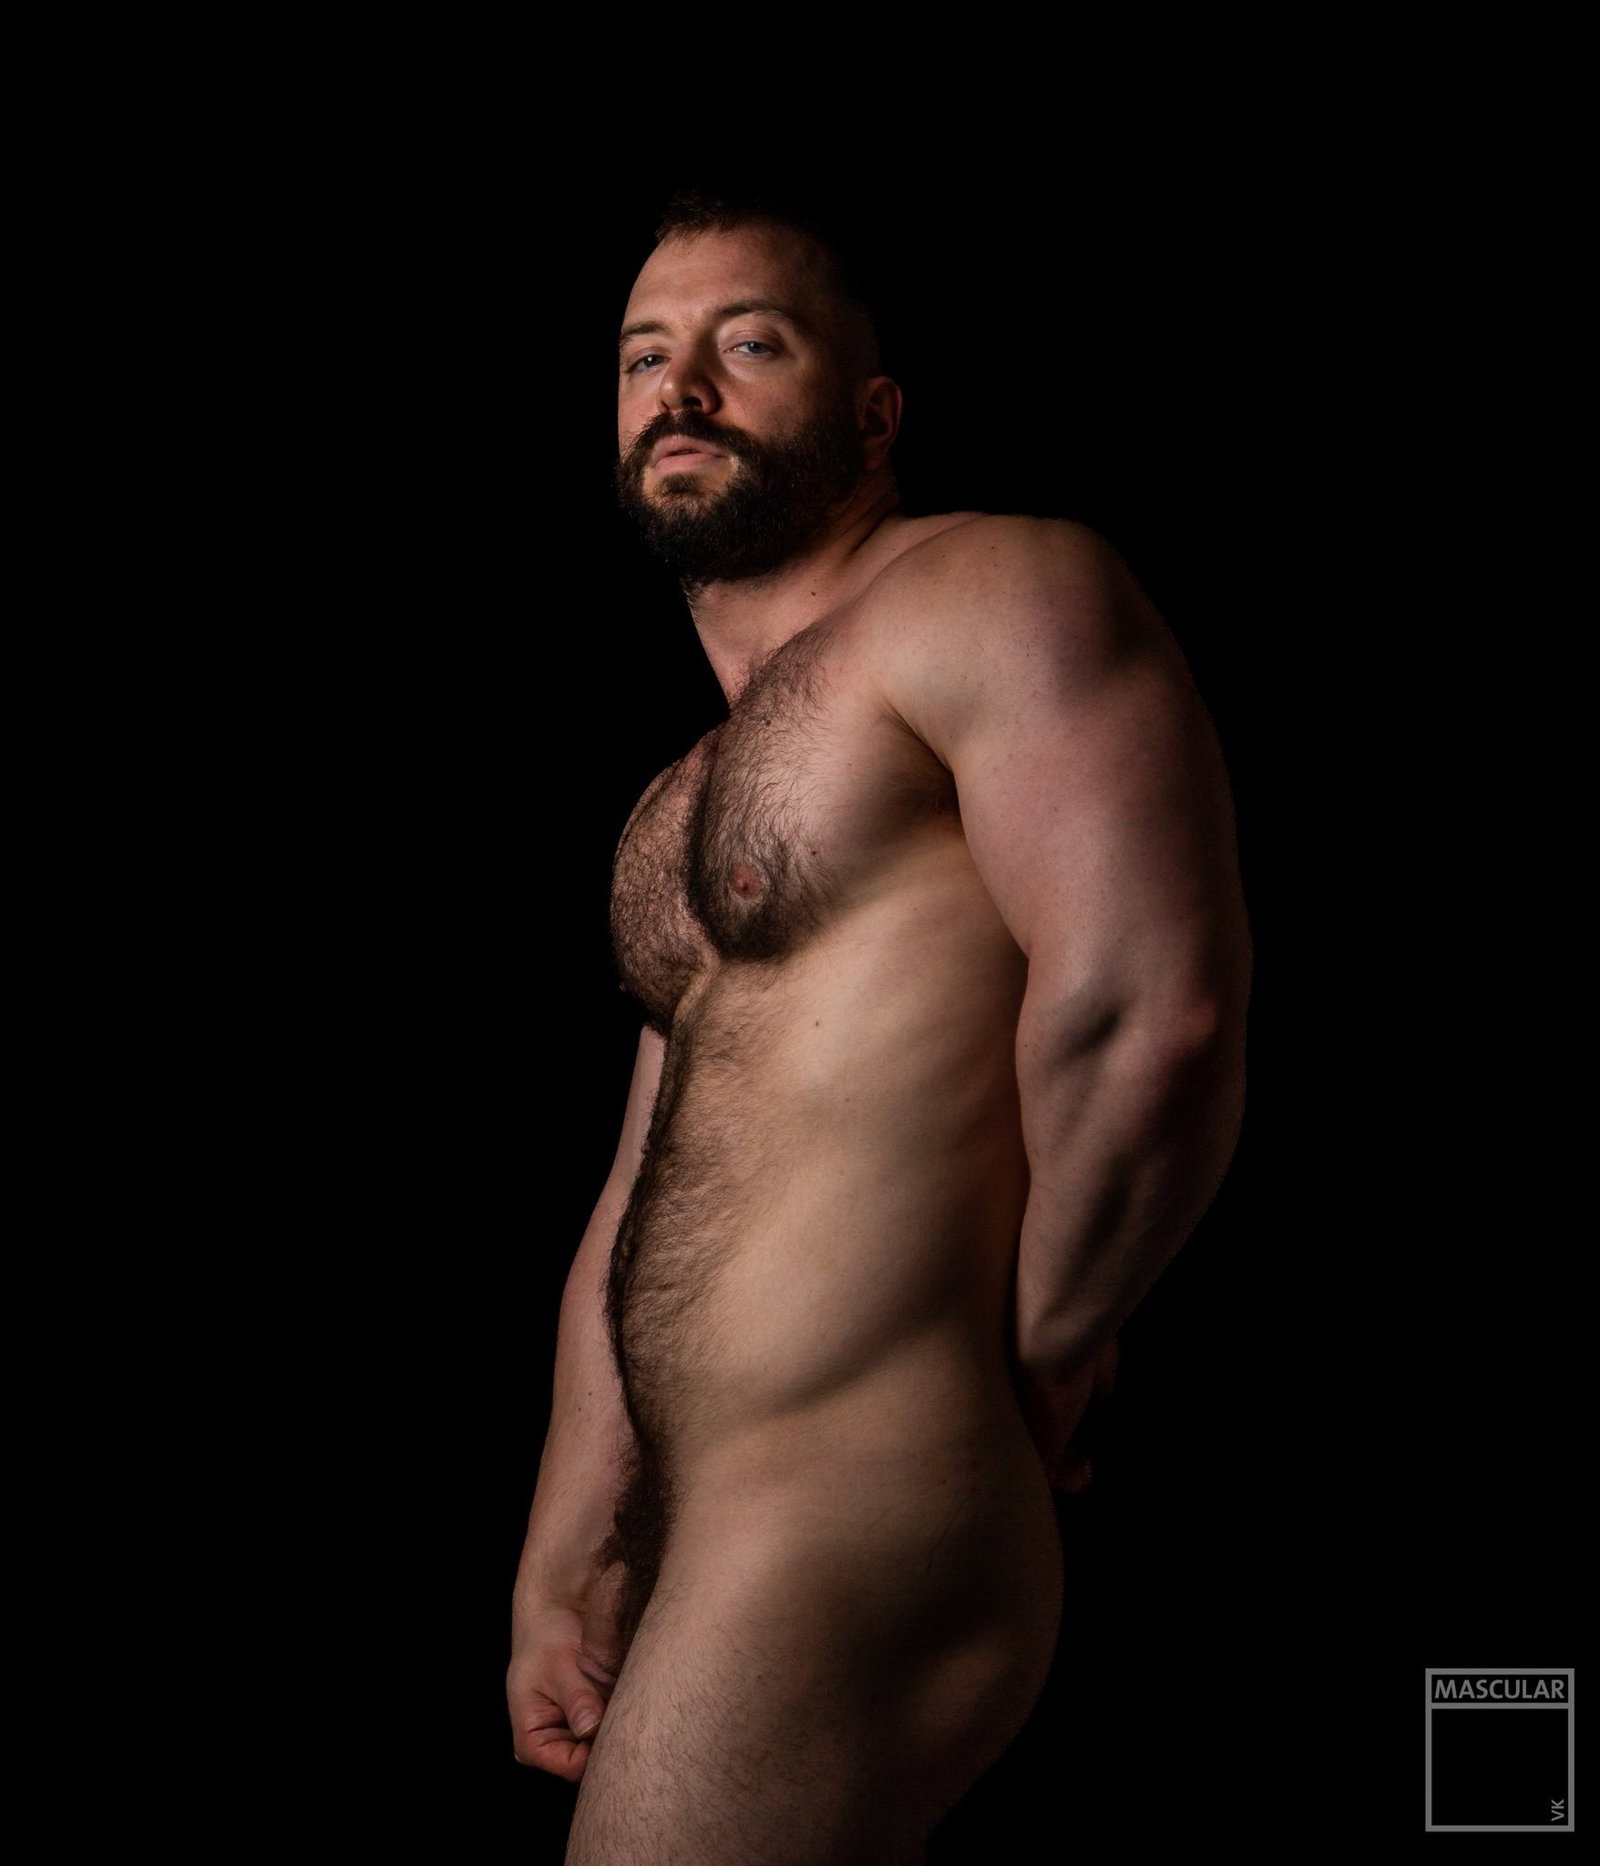 Watch the Photo by Ultra-Masculine-XXX with the username @Ultra-Masculine-XXX, posted on December 8, 2023. The post is about the topic Gay Bears. and the text says 'Forrest Ryder #ForrestRyder #hairy #muscle #bear #beard'